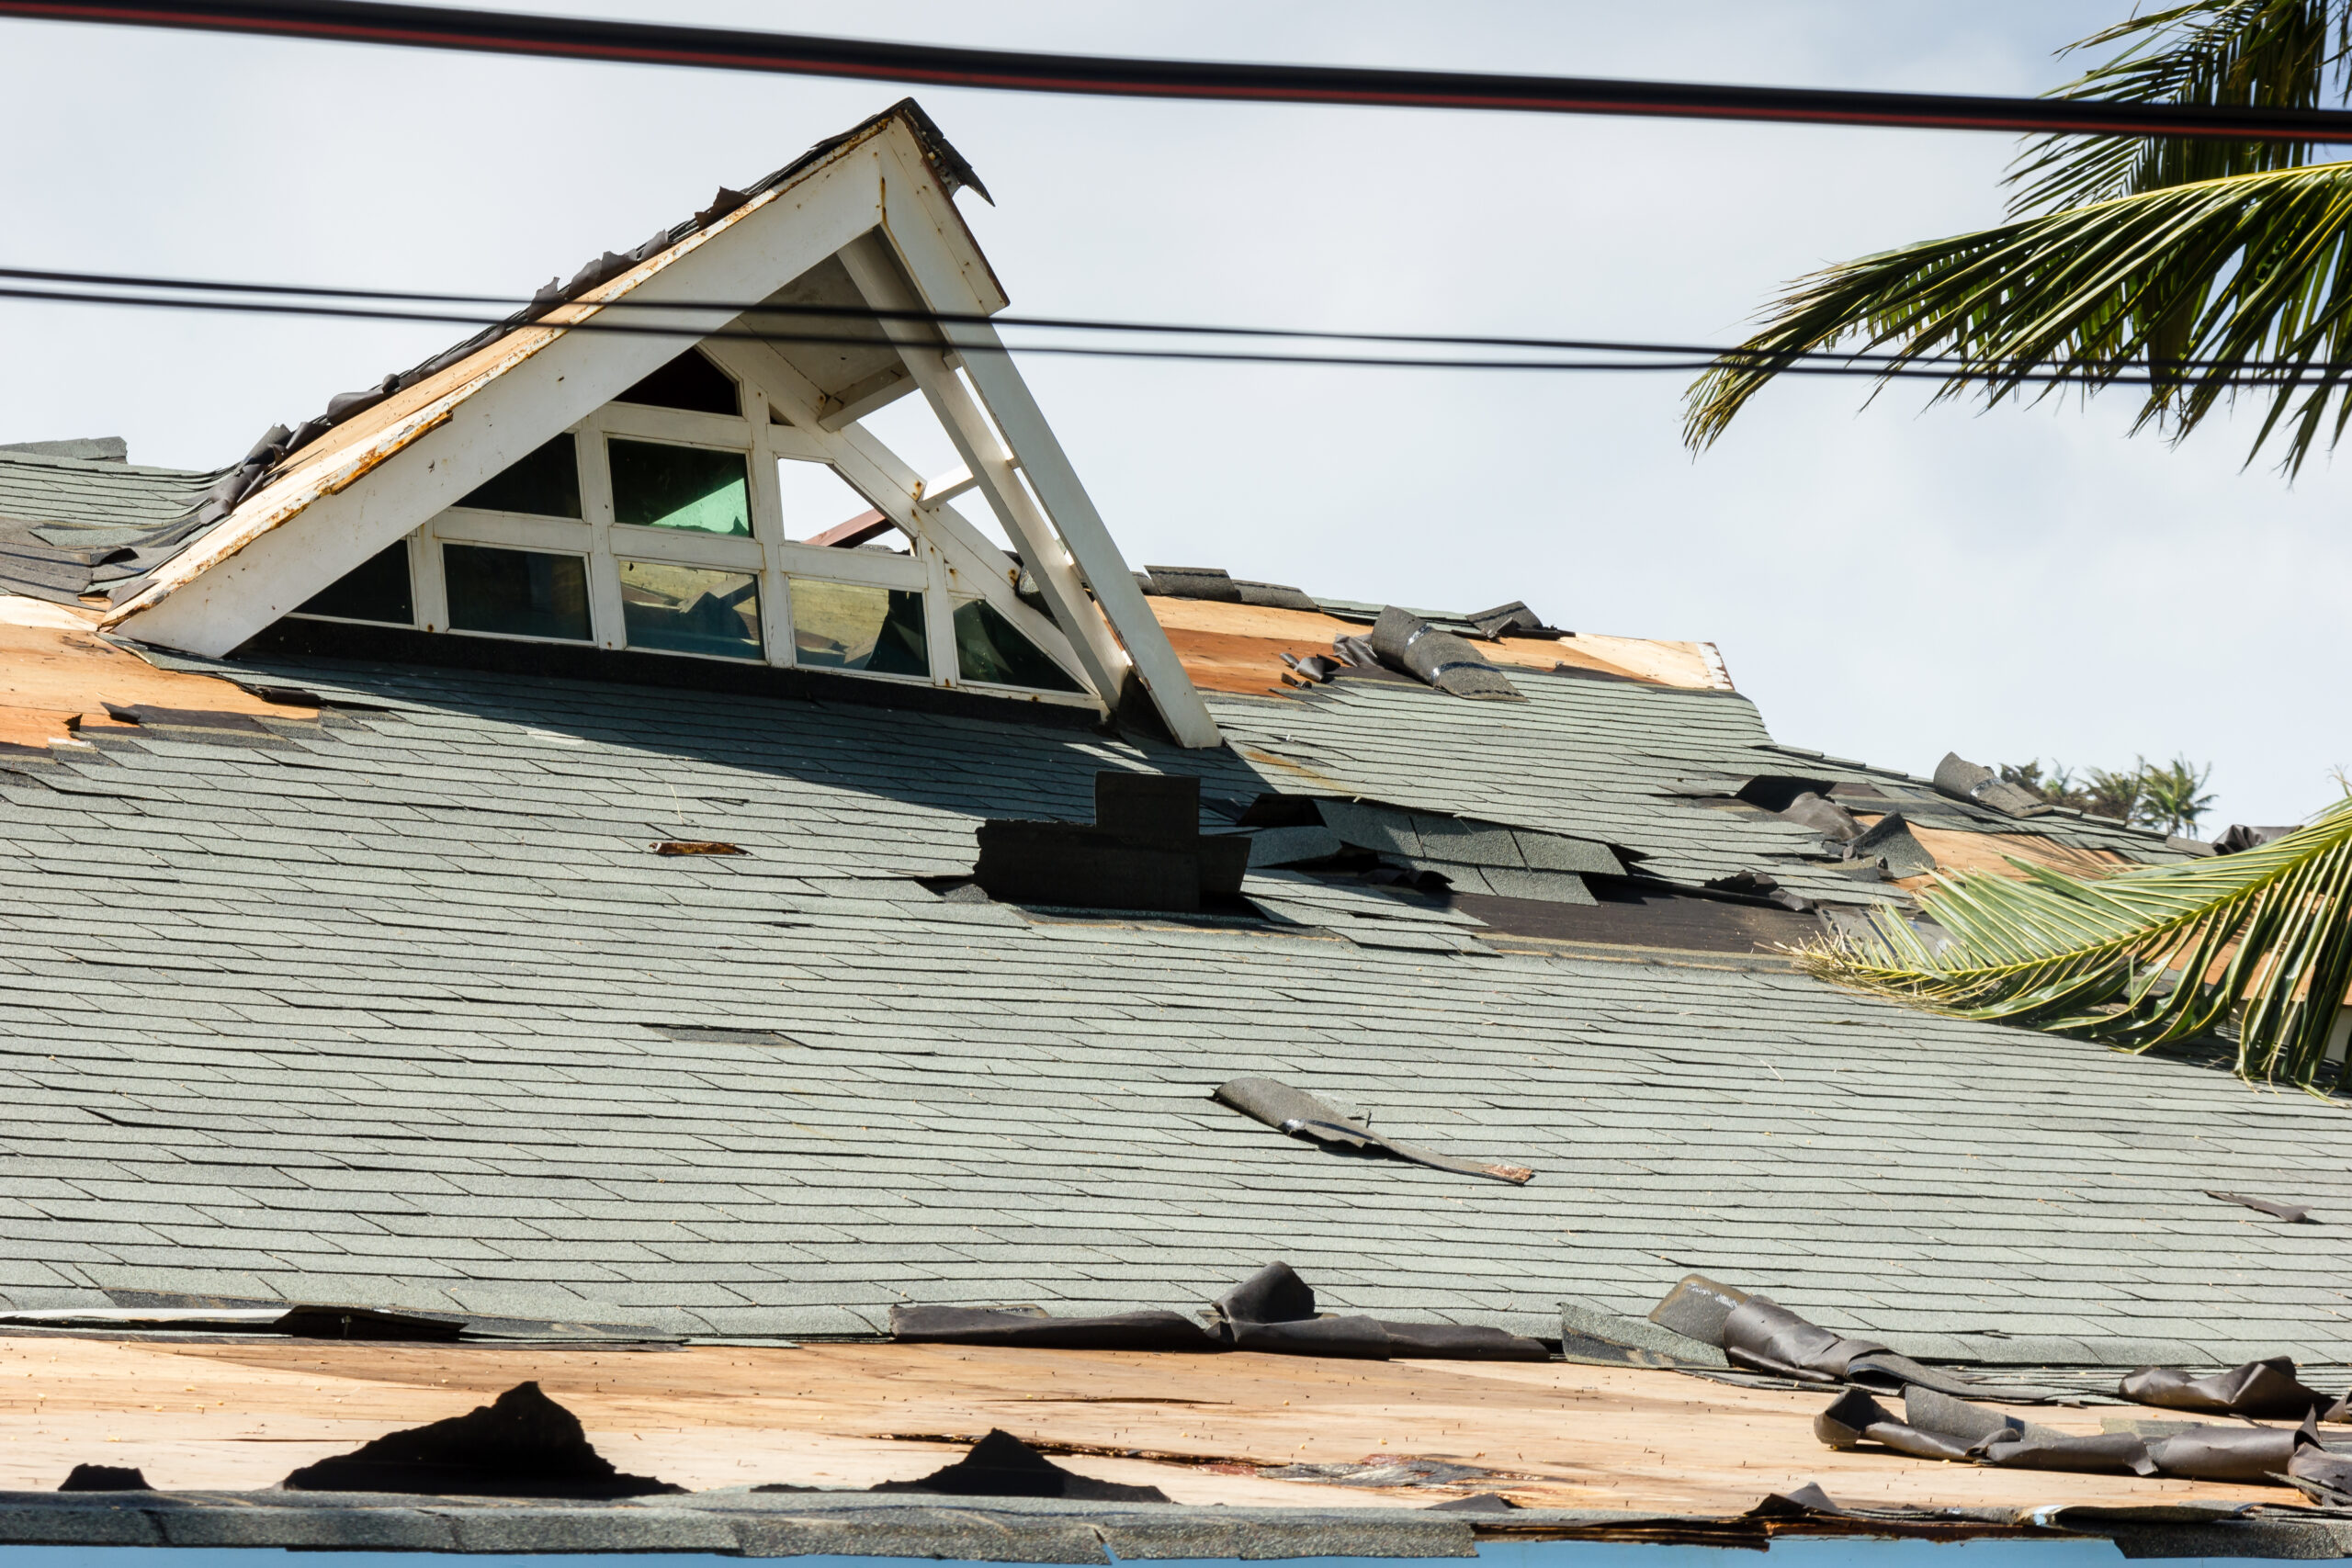 A residential roof damaged by a passing hurricane